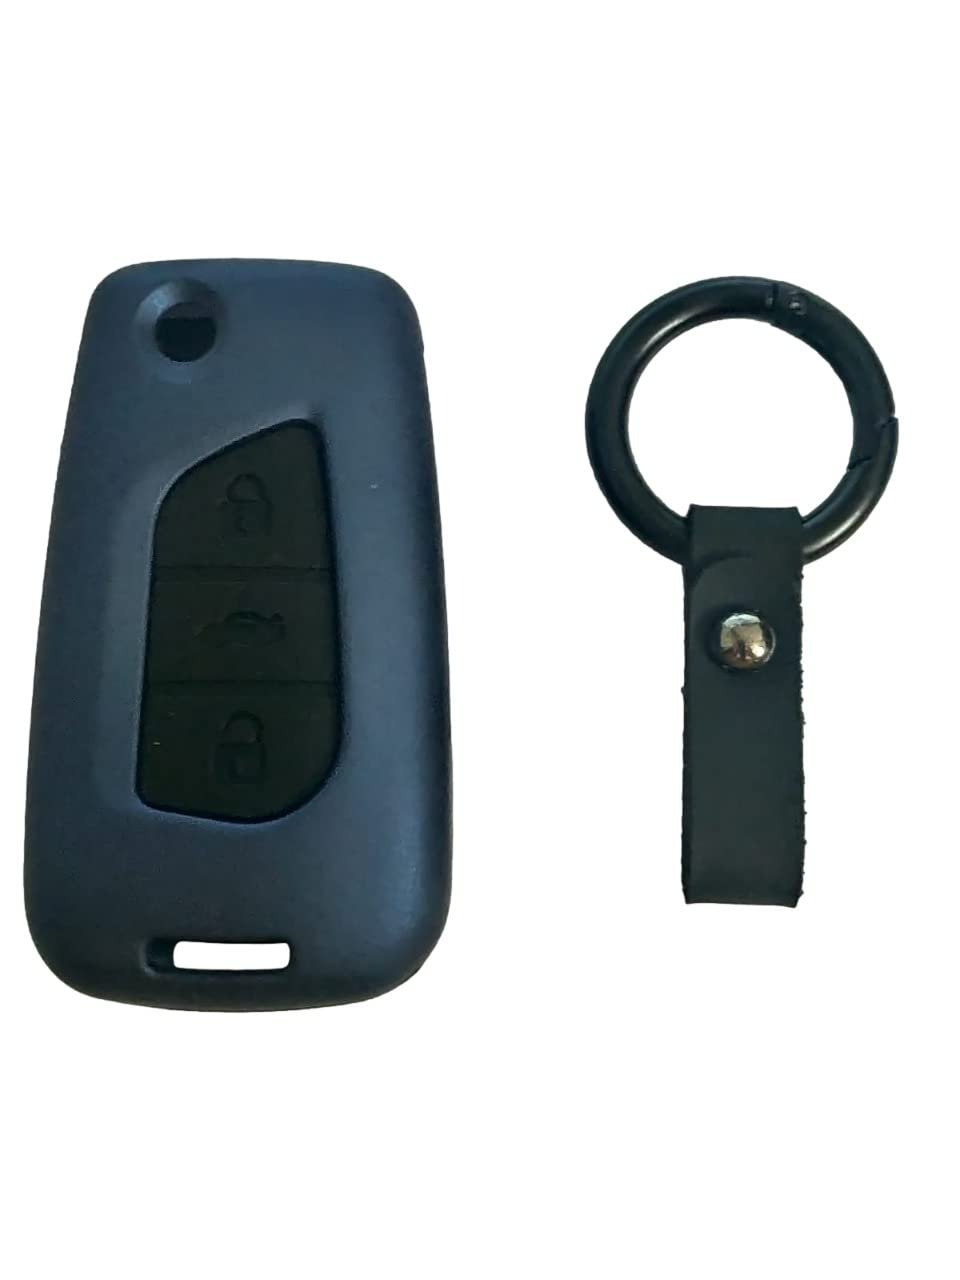 Blue Fiber Style Car Key Cover Compatible with Toyota Corolla Altis Innova Crysta 3 Button Flip Key Cover (Blue) Image